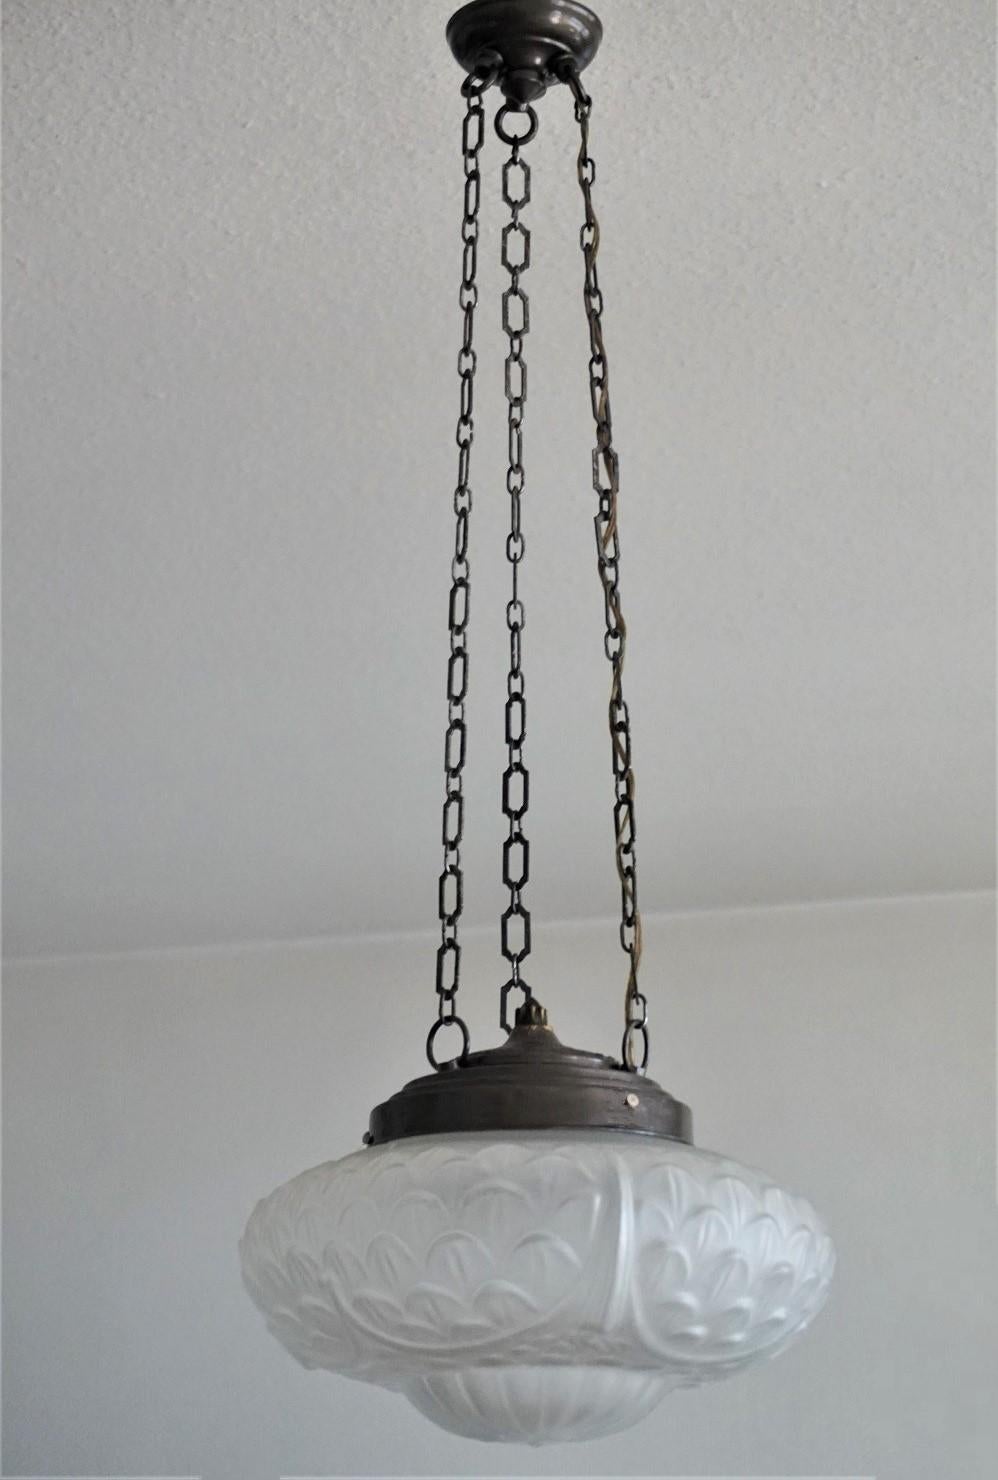 A lovely Art Deco frosted glass dome chandelier with brass fittings hanging from three brass chains connected to a circular canopy, France, early 1930s.
European wiring with one E14 light socket.
Measures: Height 30 in (76 cm)
Diameter 12 in (30